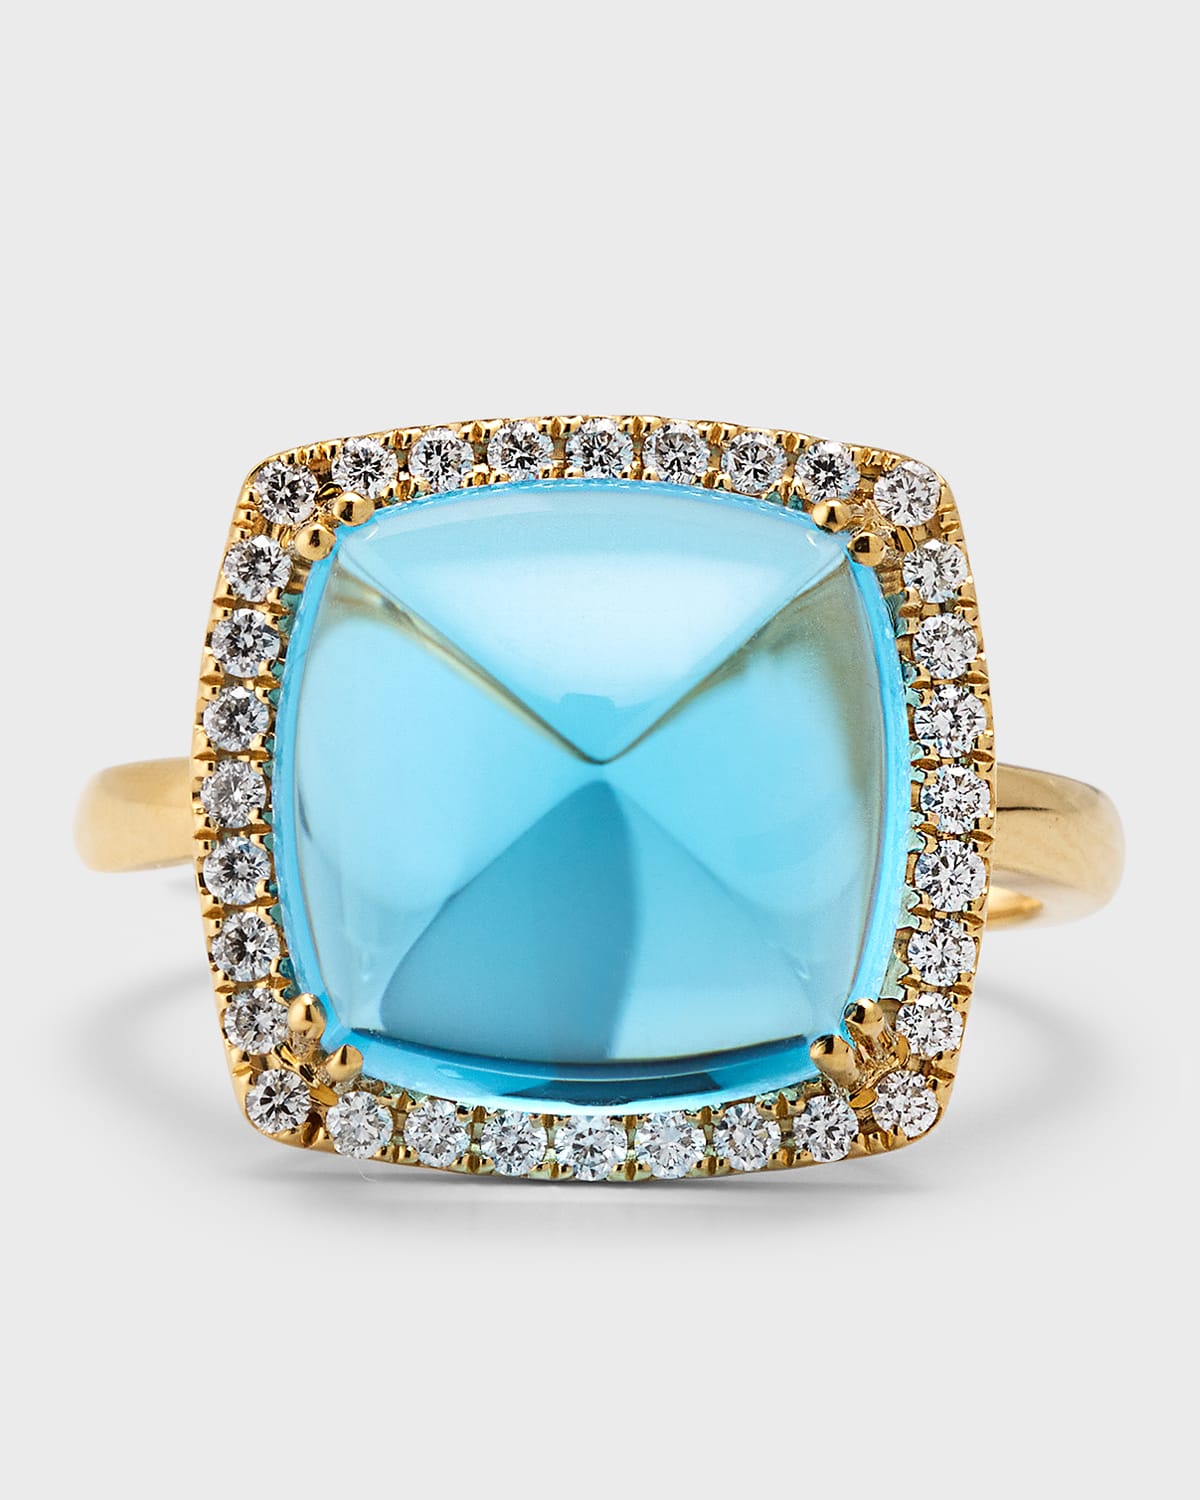 18K Yellow Gold Ring with Swiss Blue Topaz and Diamonds, Size 7, 11.01tcw